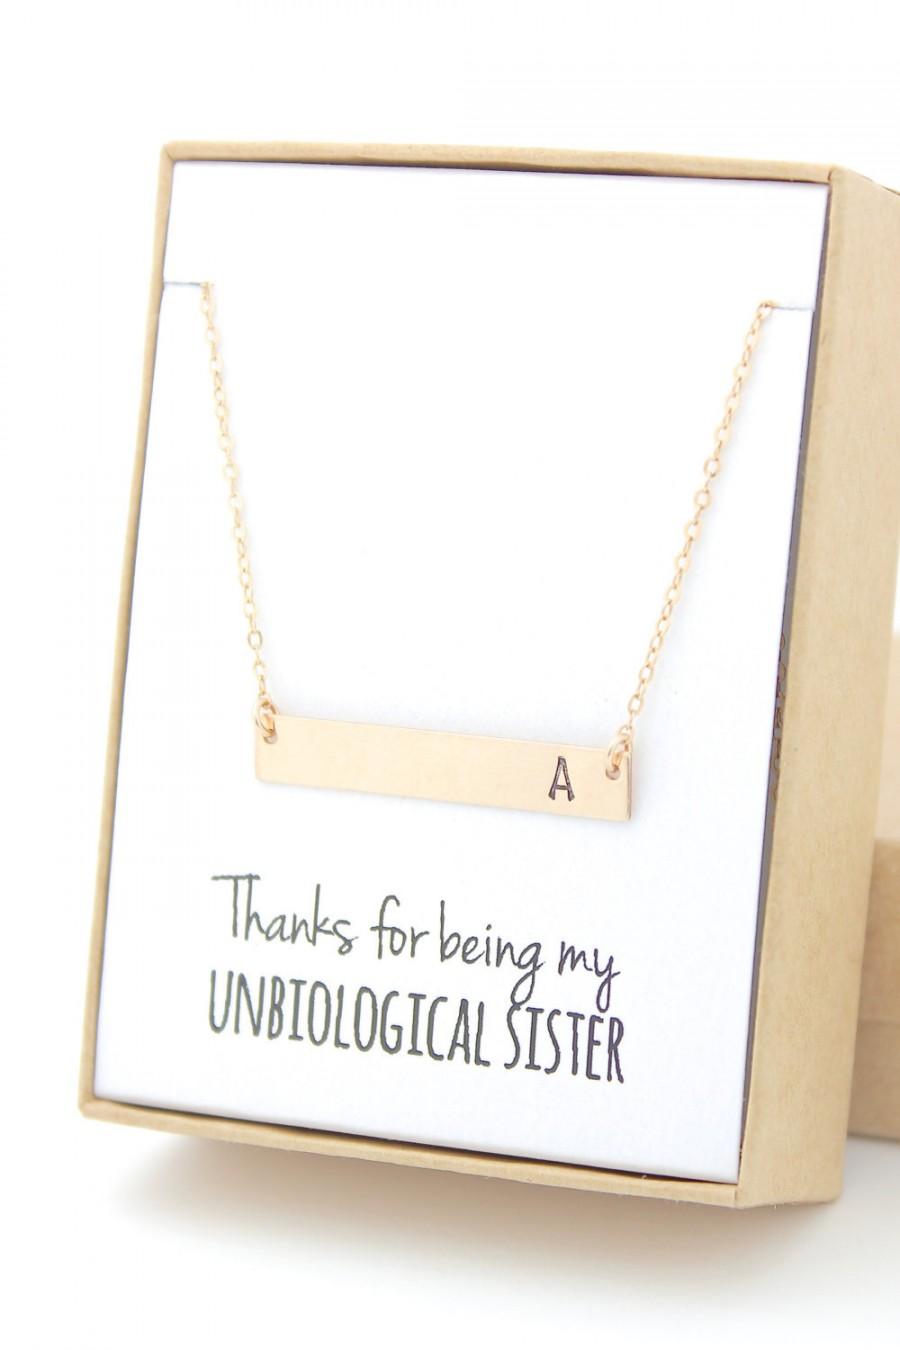 Wedding - Gold Bar Necklace - Bridesmaid Gift Jewelry - Thanks for Being My Unbiological Sister - Wedding Party - Bridal Party Gifts - Initial Letter